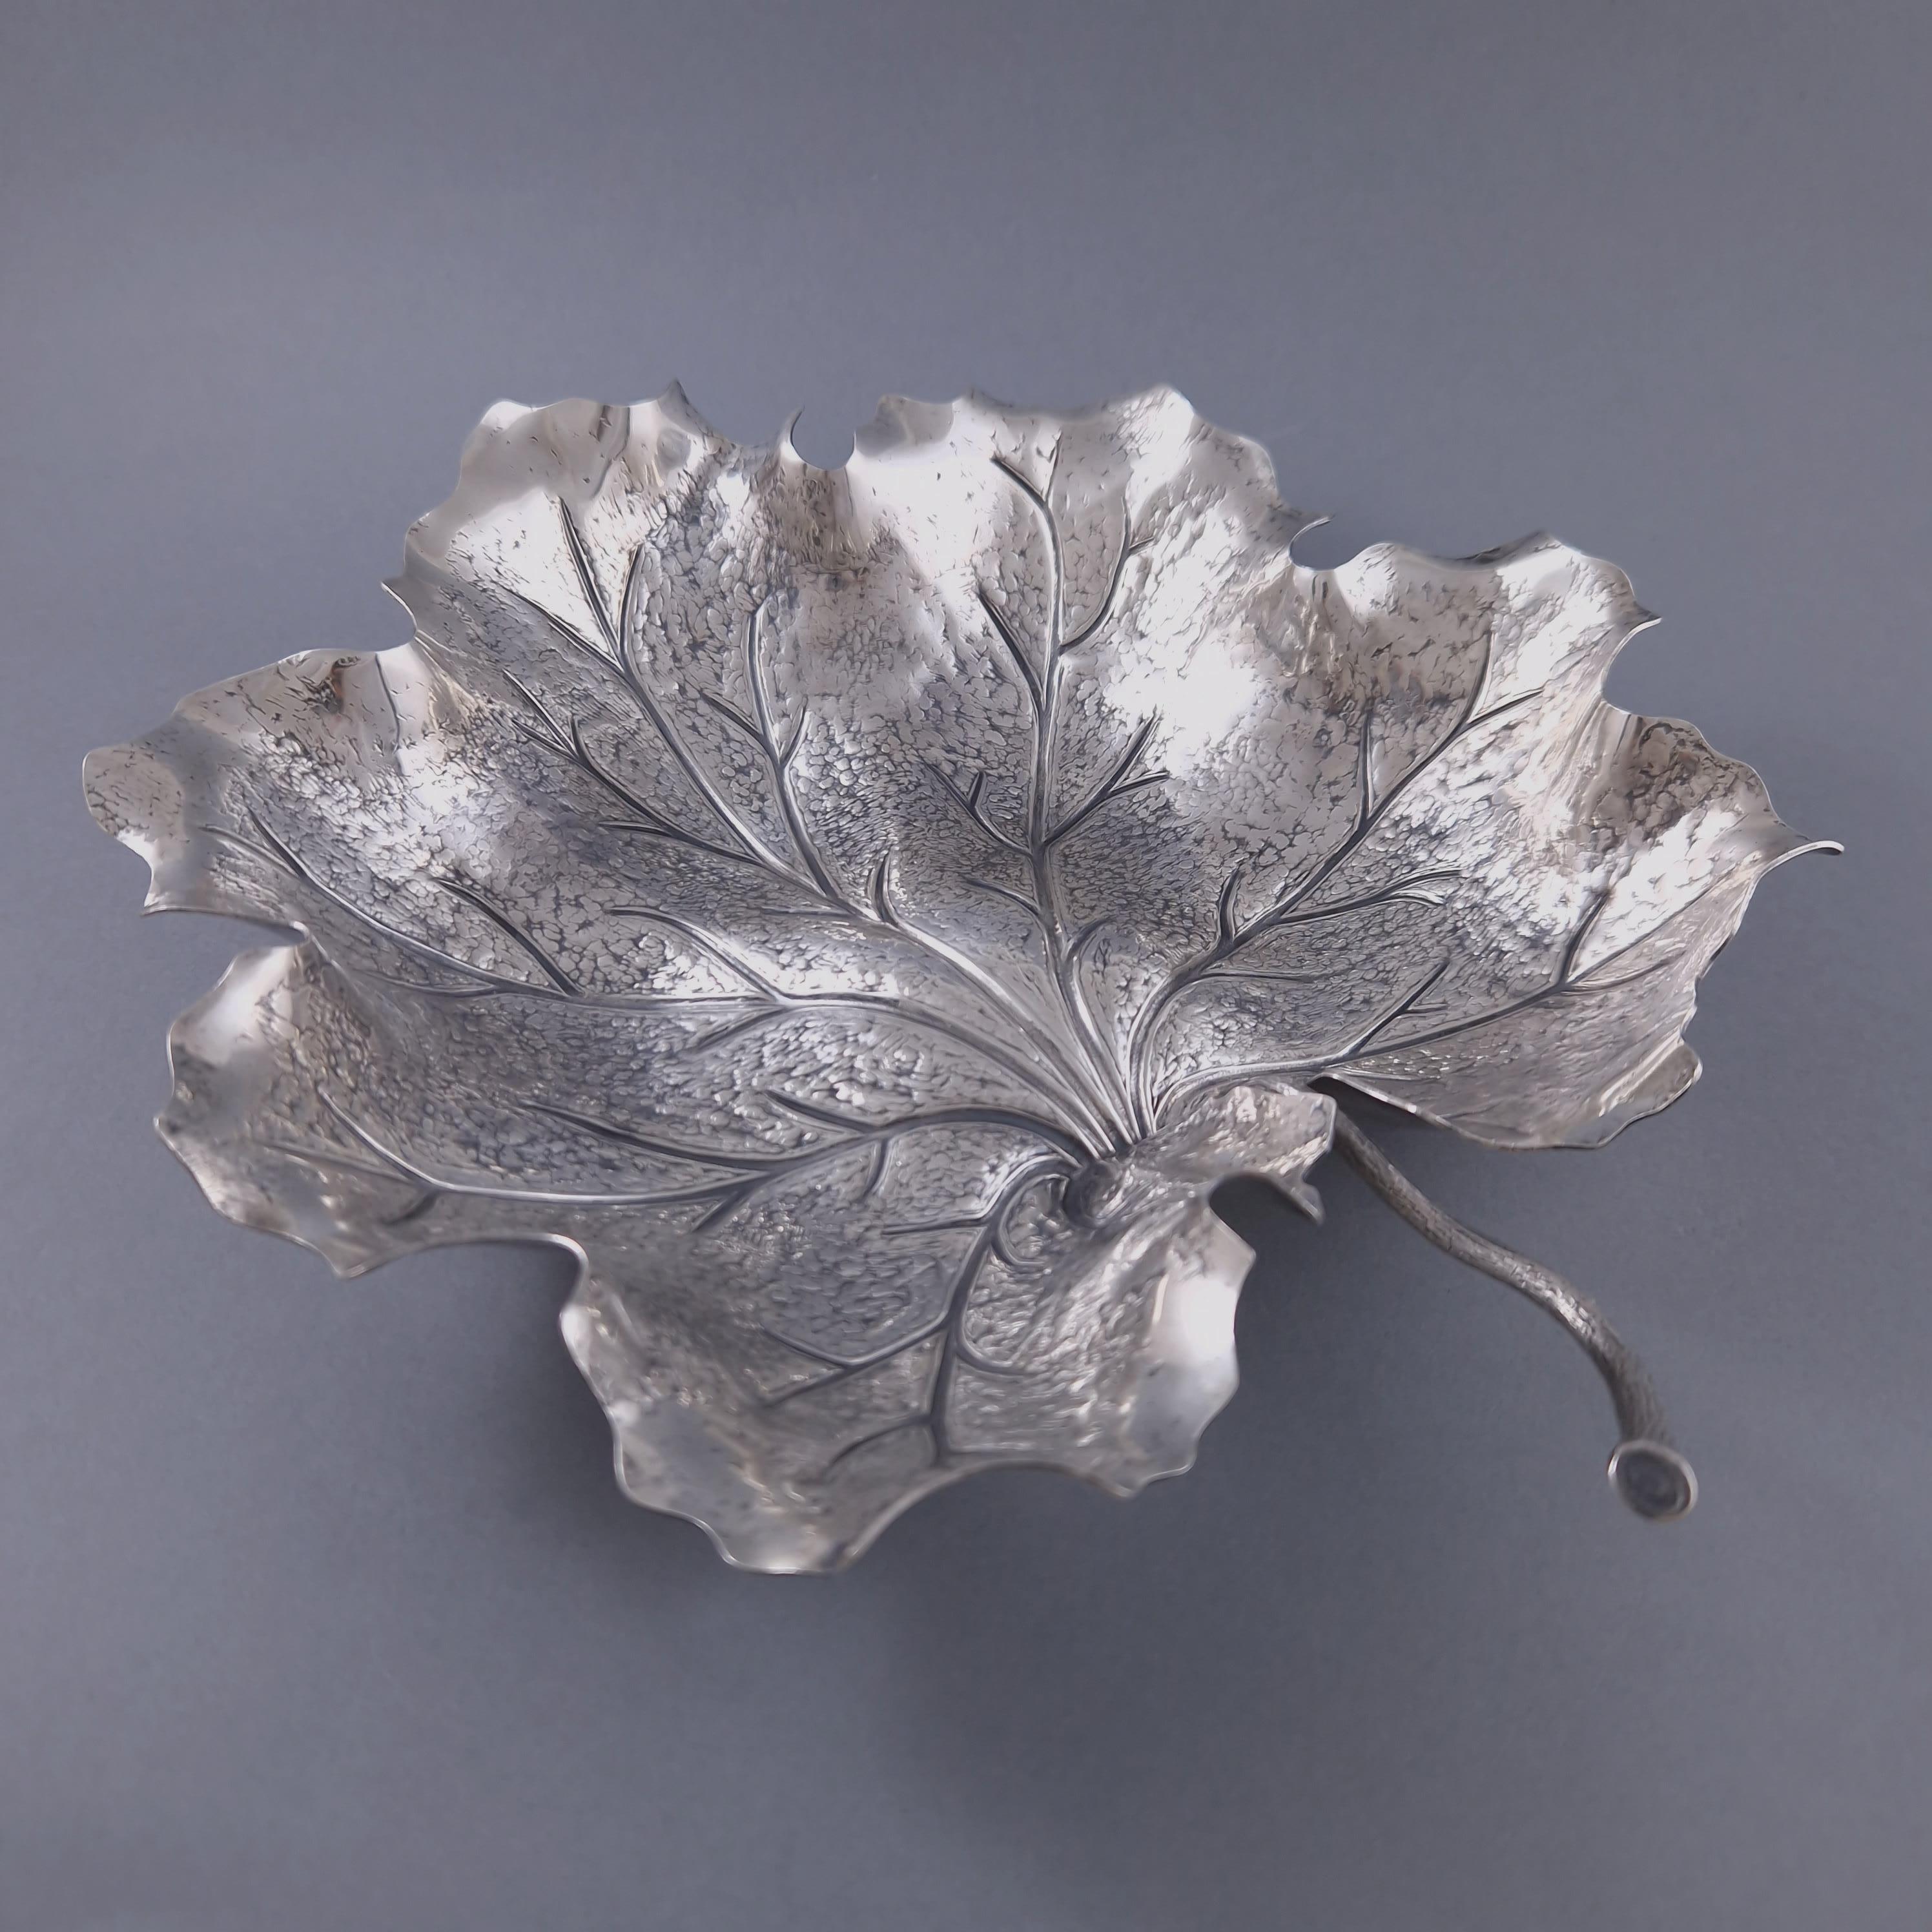 Large finely chiseled sterling silver leaf 20th century work by Buccellati 

Hallmark 925 and Buccellati hallmark 

Length: 24.3 cm 
Width: 22 cm 
Height: 4.5 cm 
Weight: 356 grams.